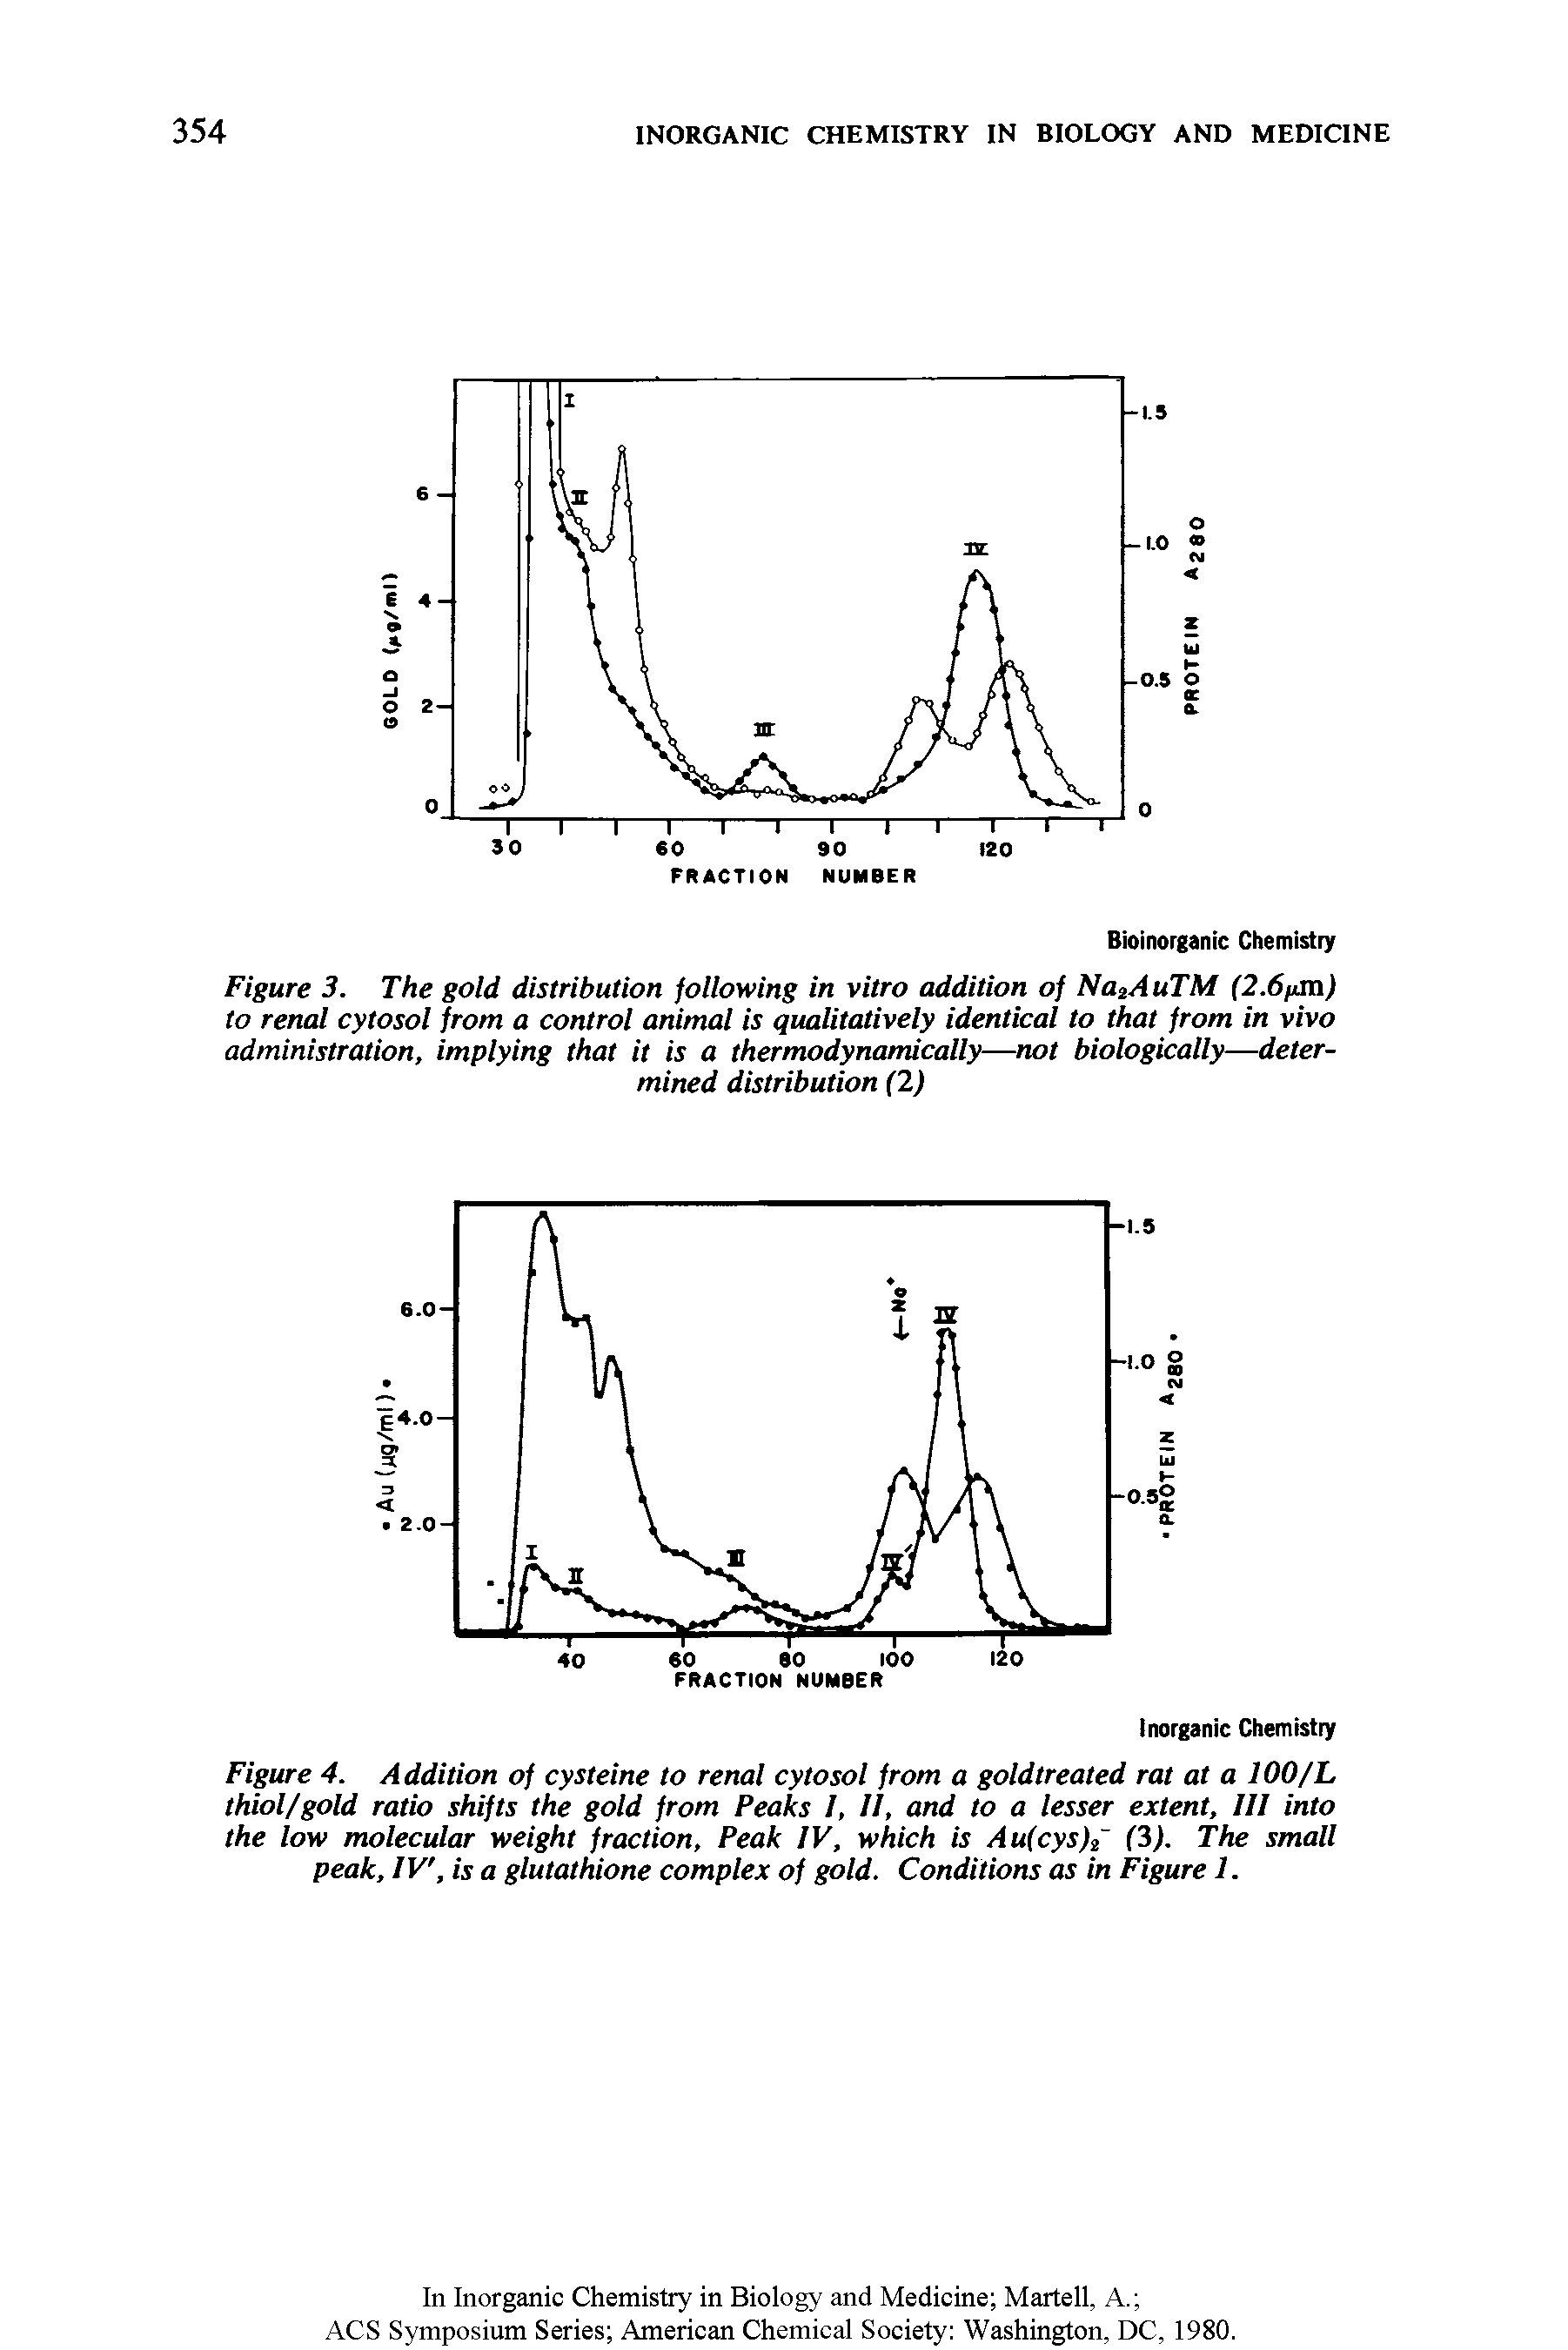 Figure 4. Addition of cysteine to renai cytosol from a gold treated rat at a 100/L thiol/gold ratio shifts the gold from Peaks I, II, and to a lesser extent. III into the low molecular weight fraction. Peak IV, which is Au(cys)i (3). The smaii peak. IV, is a glutathione complex of gold. Conditions as in Figure 1.